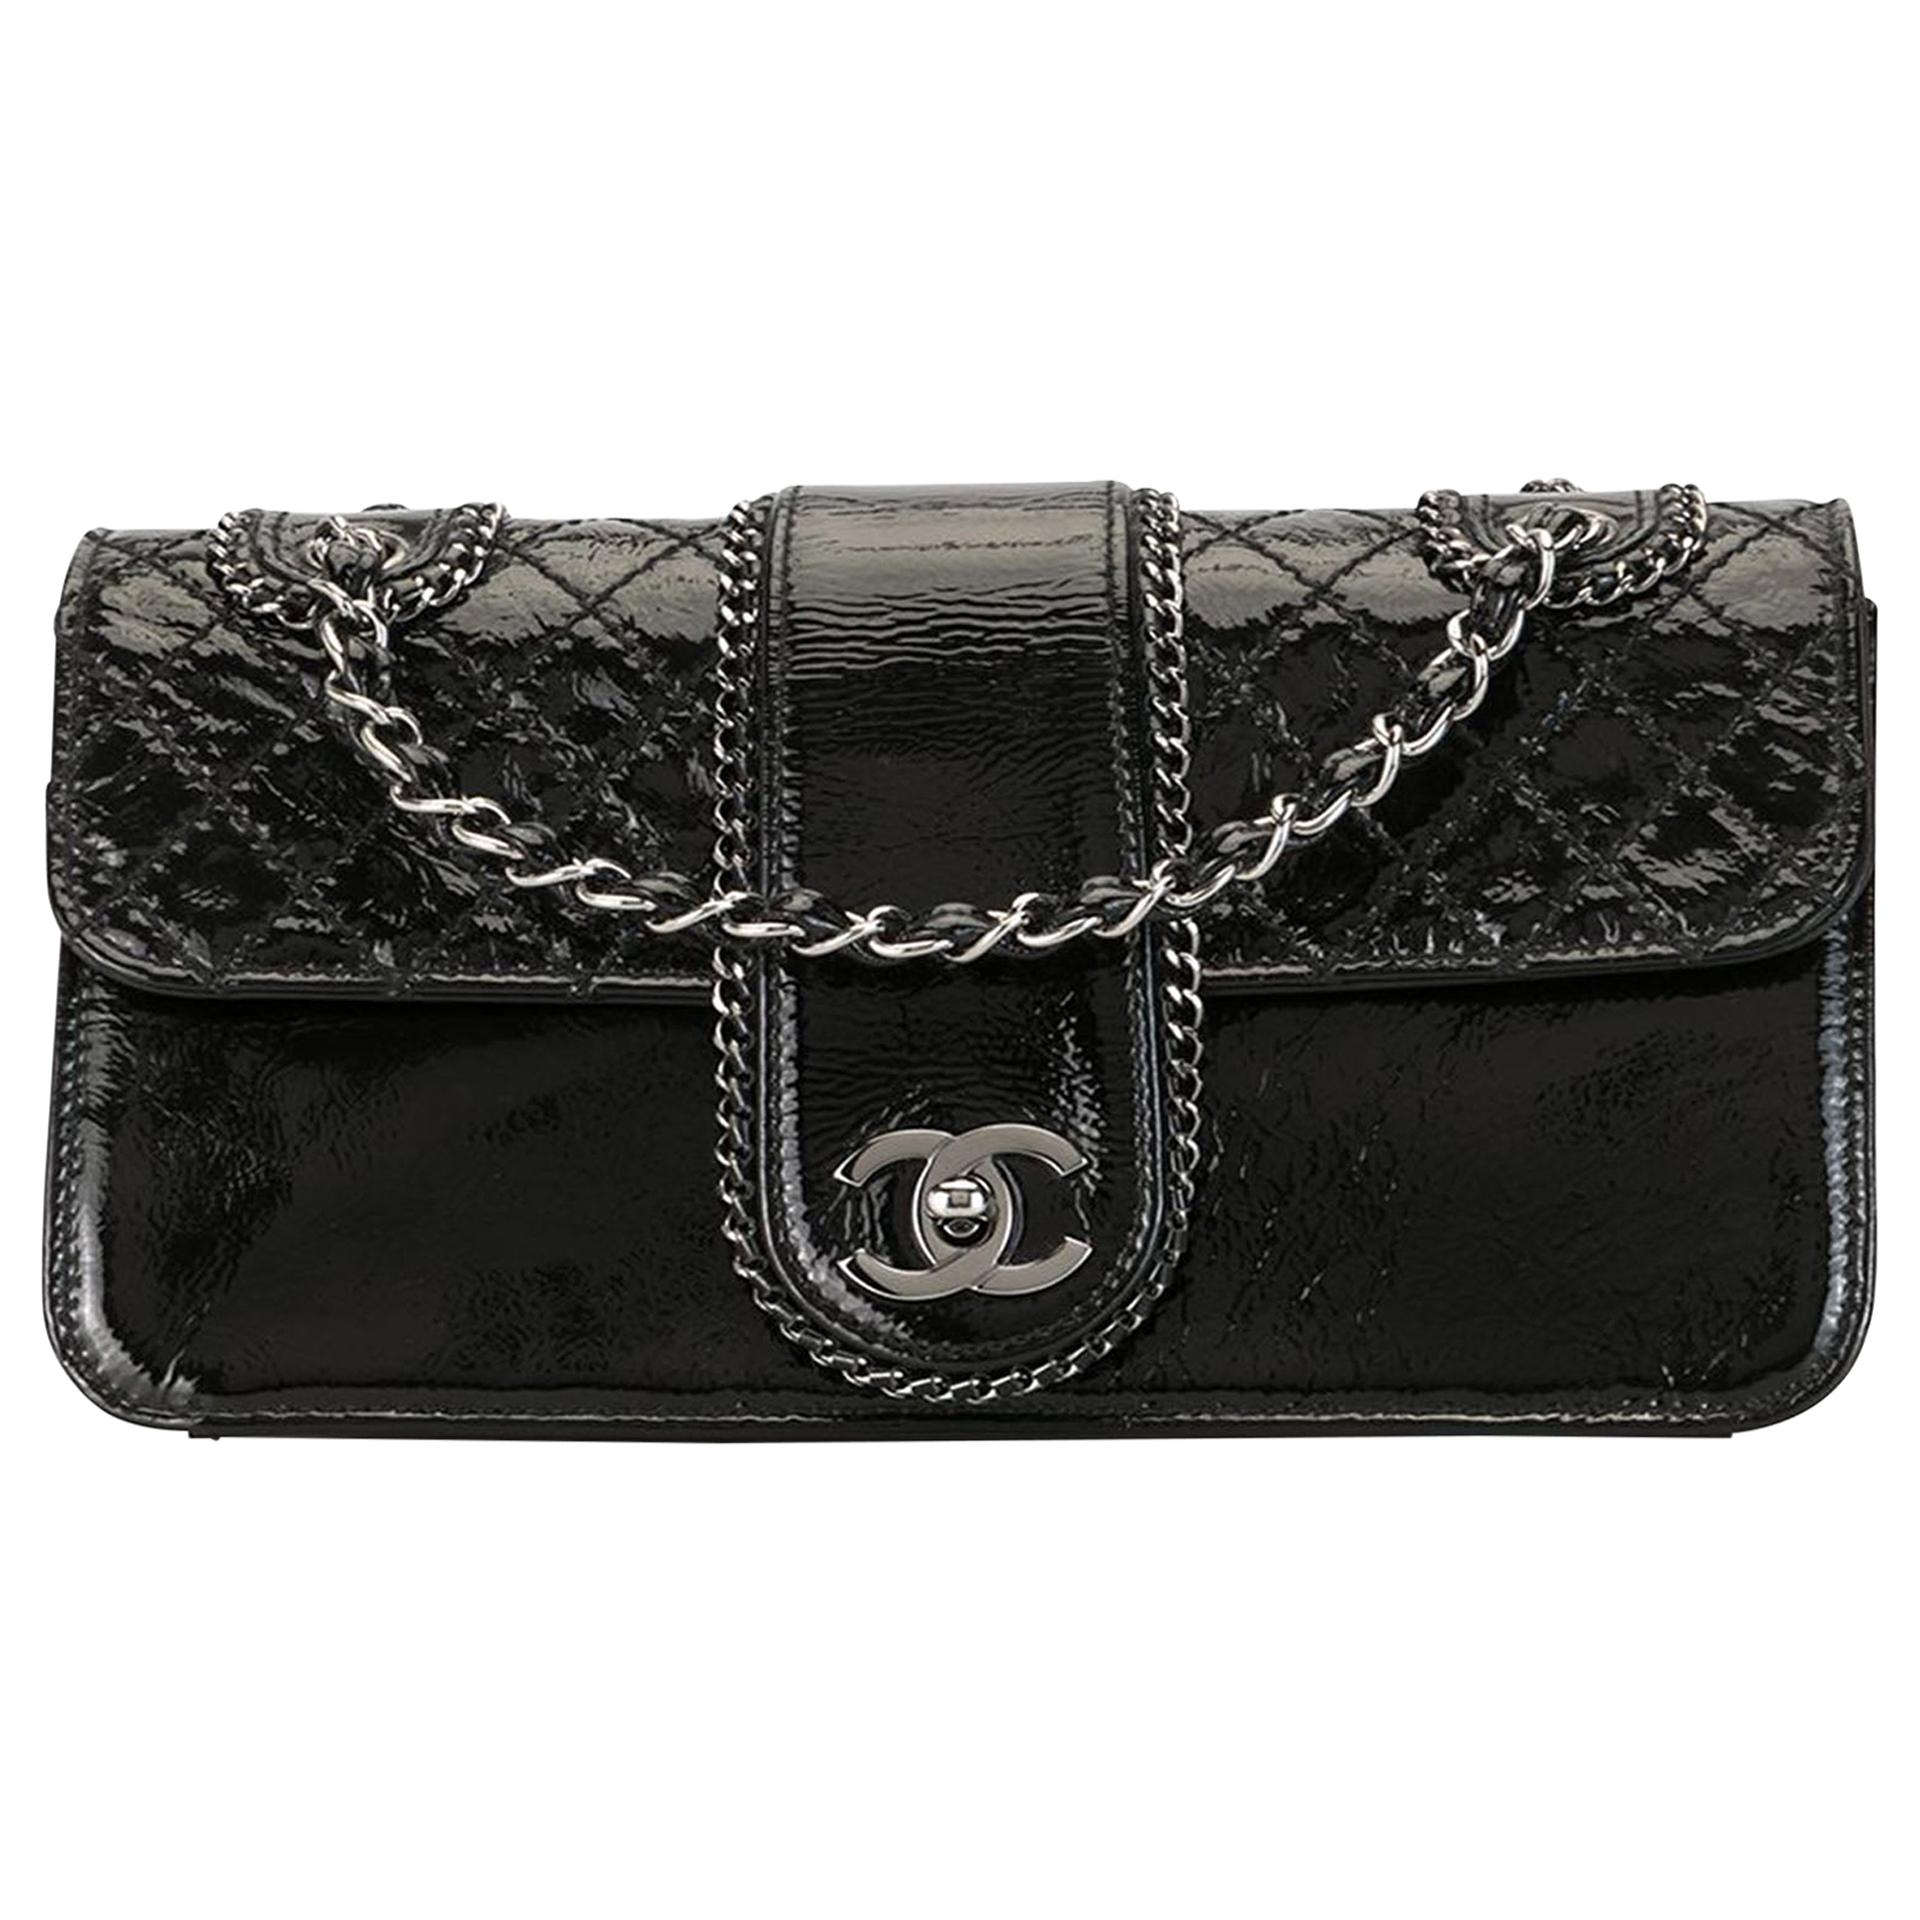 Chanel Vintage Quilted Double Chain Shoulder Bag